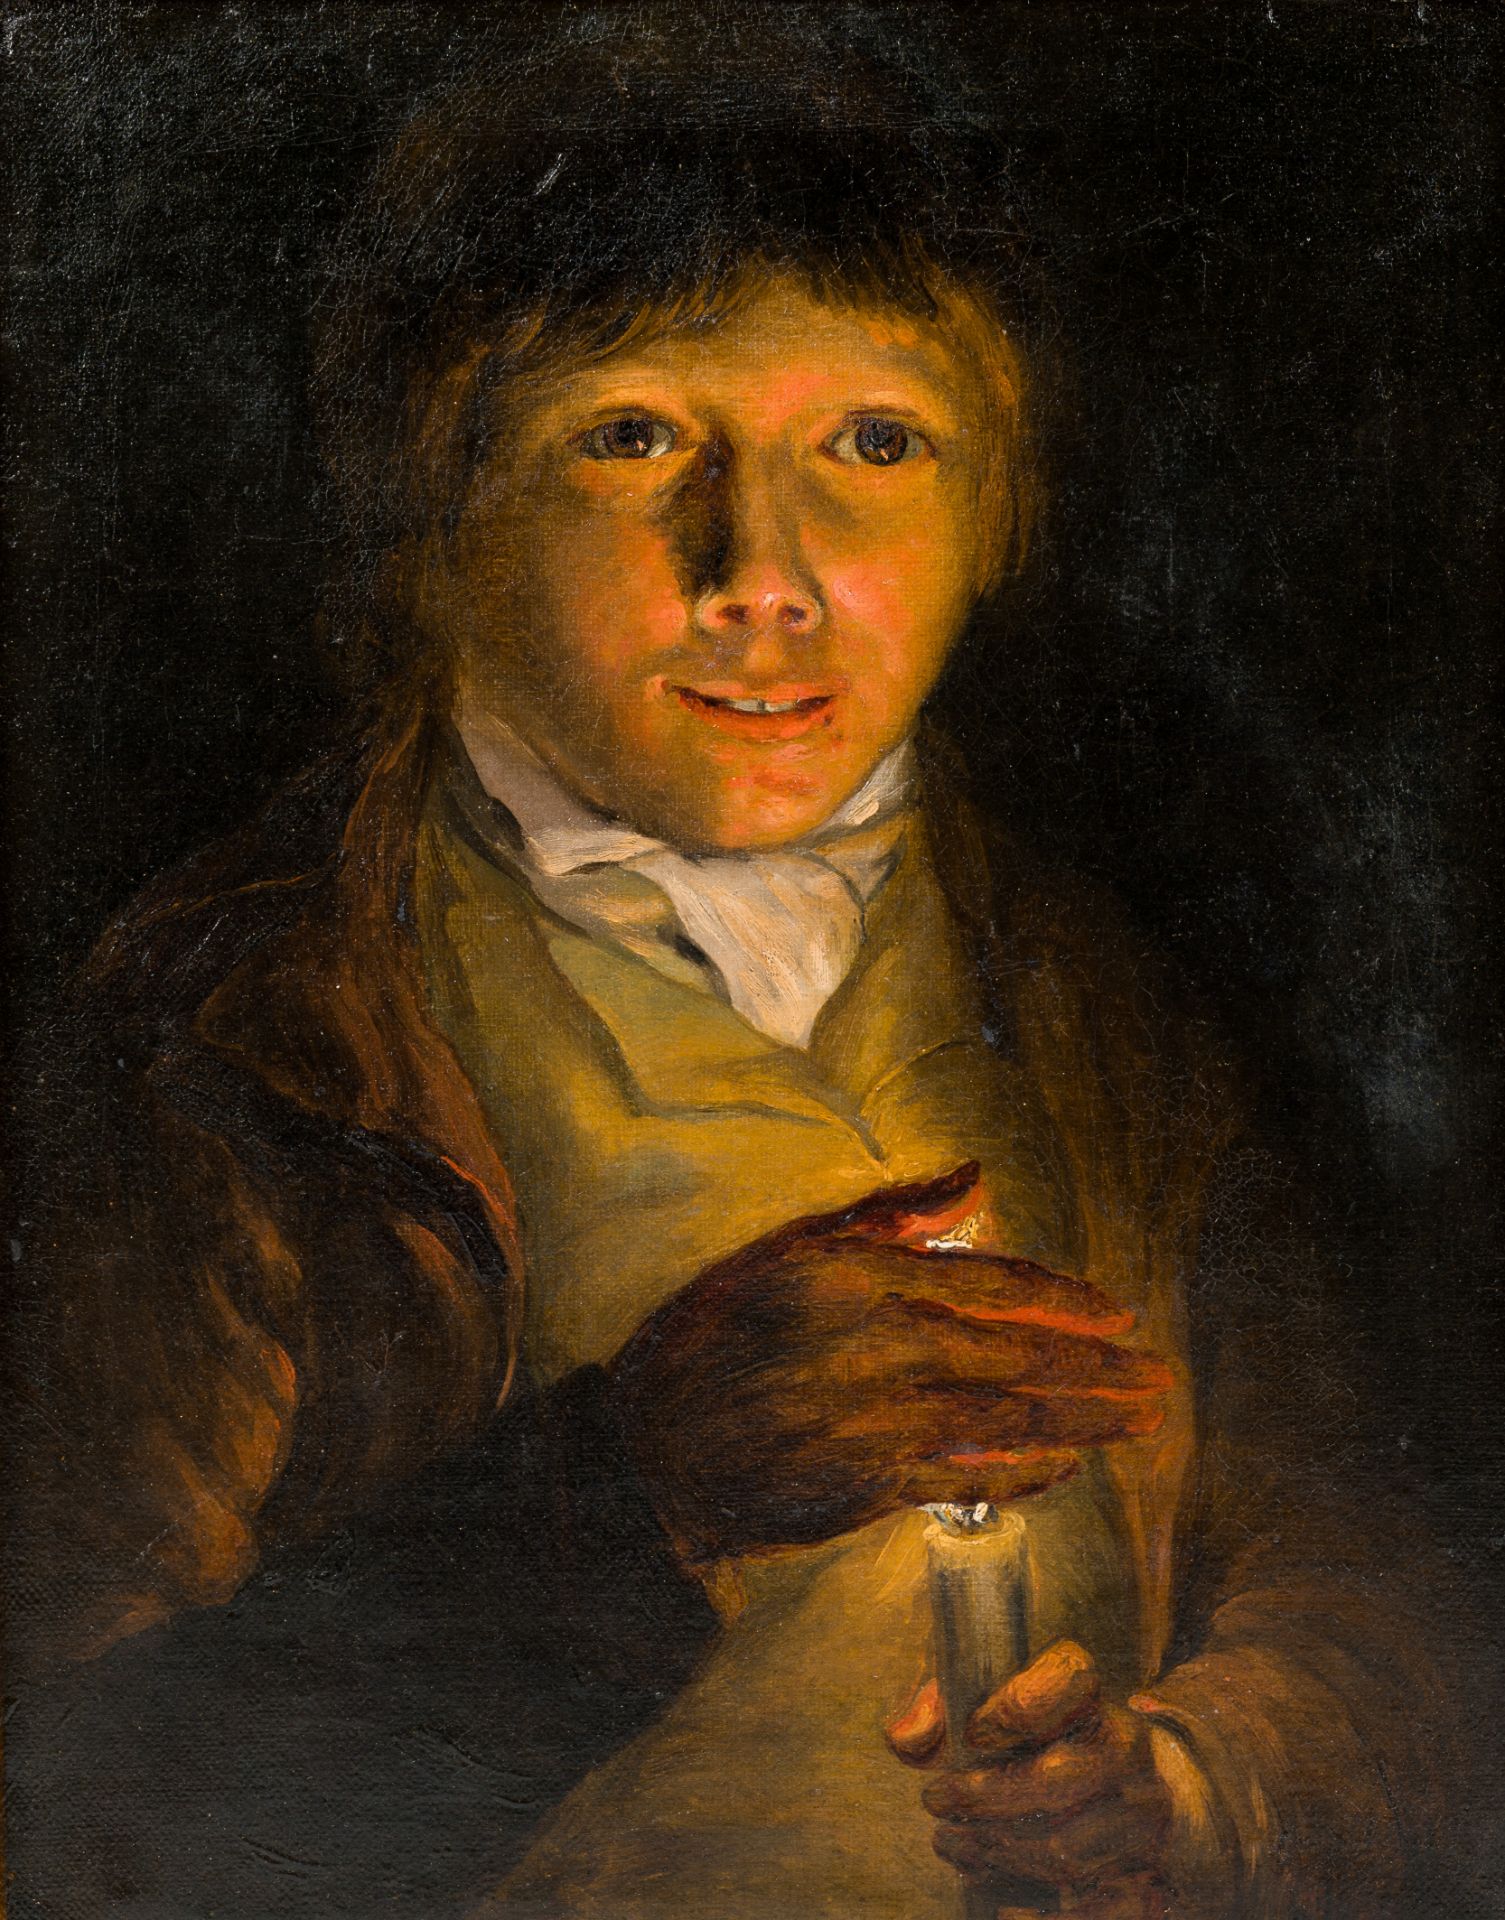 English school, in the manner of Godfried van Schalcken (1643-1706): Man with a candle in hand, oil